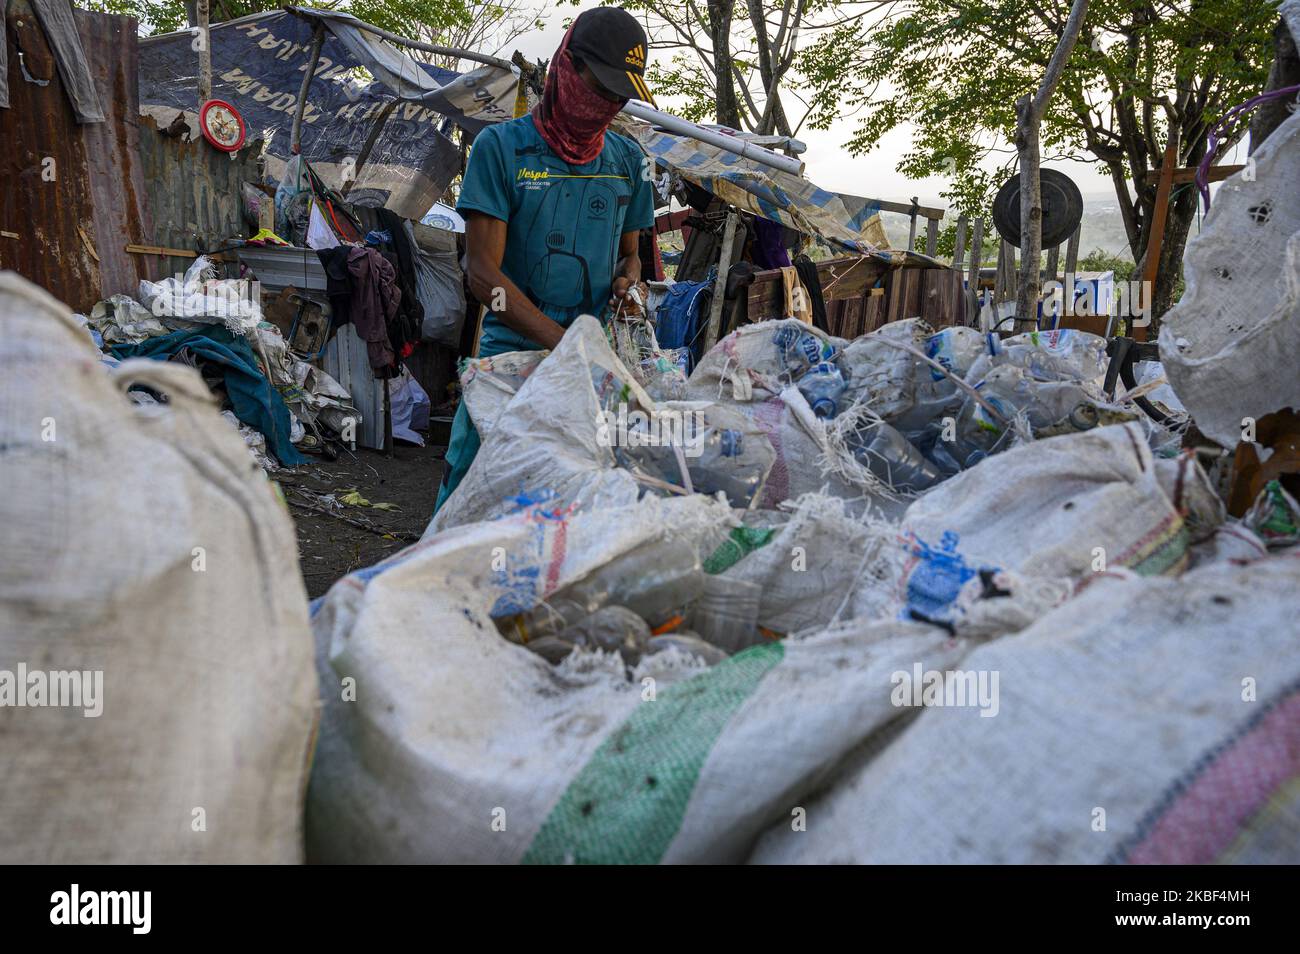 A scavenger sorts out the plastic waste he collects for recycling at the Kawatuna landfill, Palu, Central Sulawesi, Indonesia on January 22, 2020. The economic potential for recycling plastic waste is huge because based on the results of an environmental audit by Greenpeace in 2019, only 9 percent of the waste plastic is recycled, 12 percent is burned and 79 percent ends up in landfills and waterways like rivers that run into the ocean. Indonesia is the second largest waste producer in the world after China. (Photo by Basri Marzuki/NurPhoto) Stock Photo